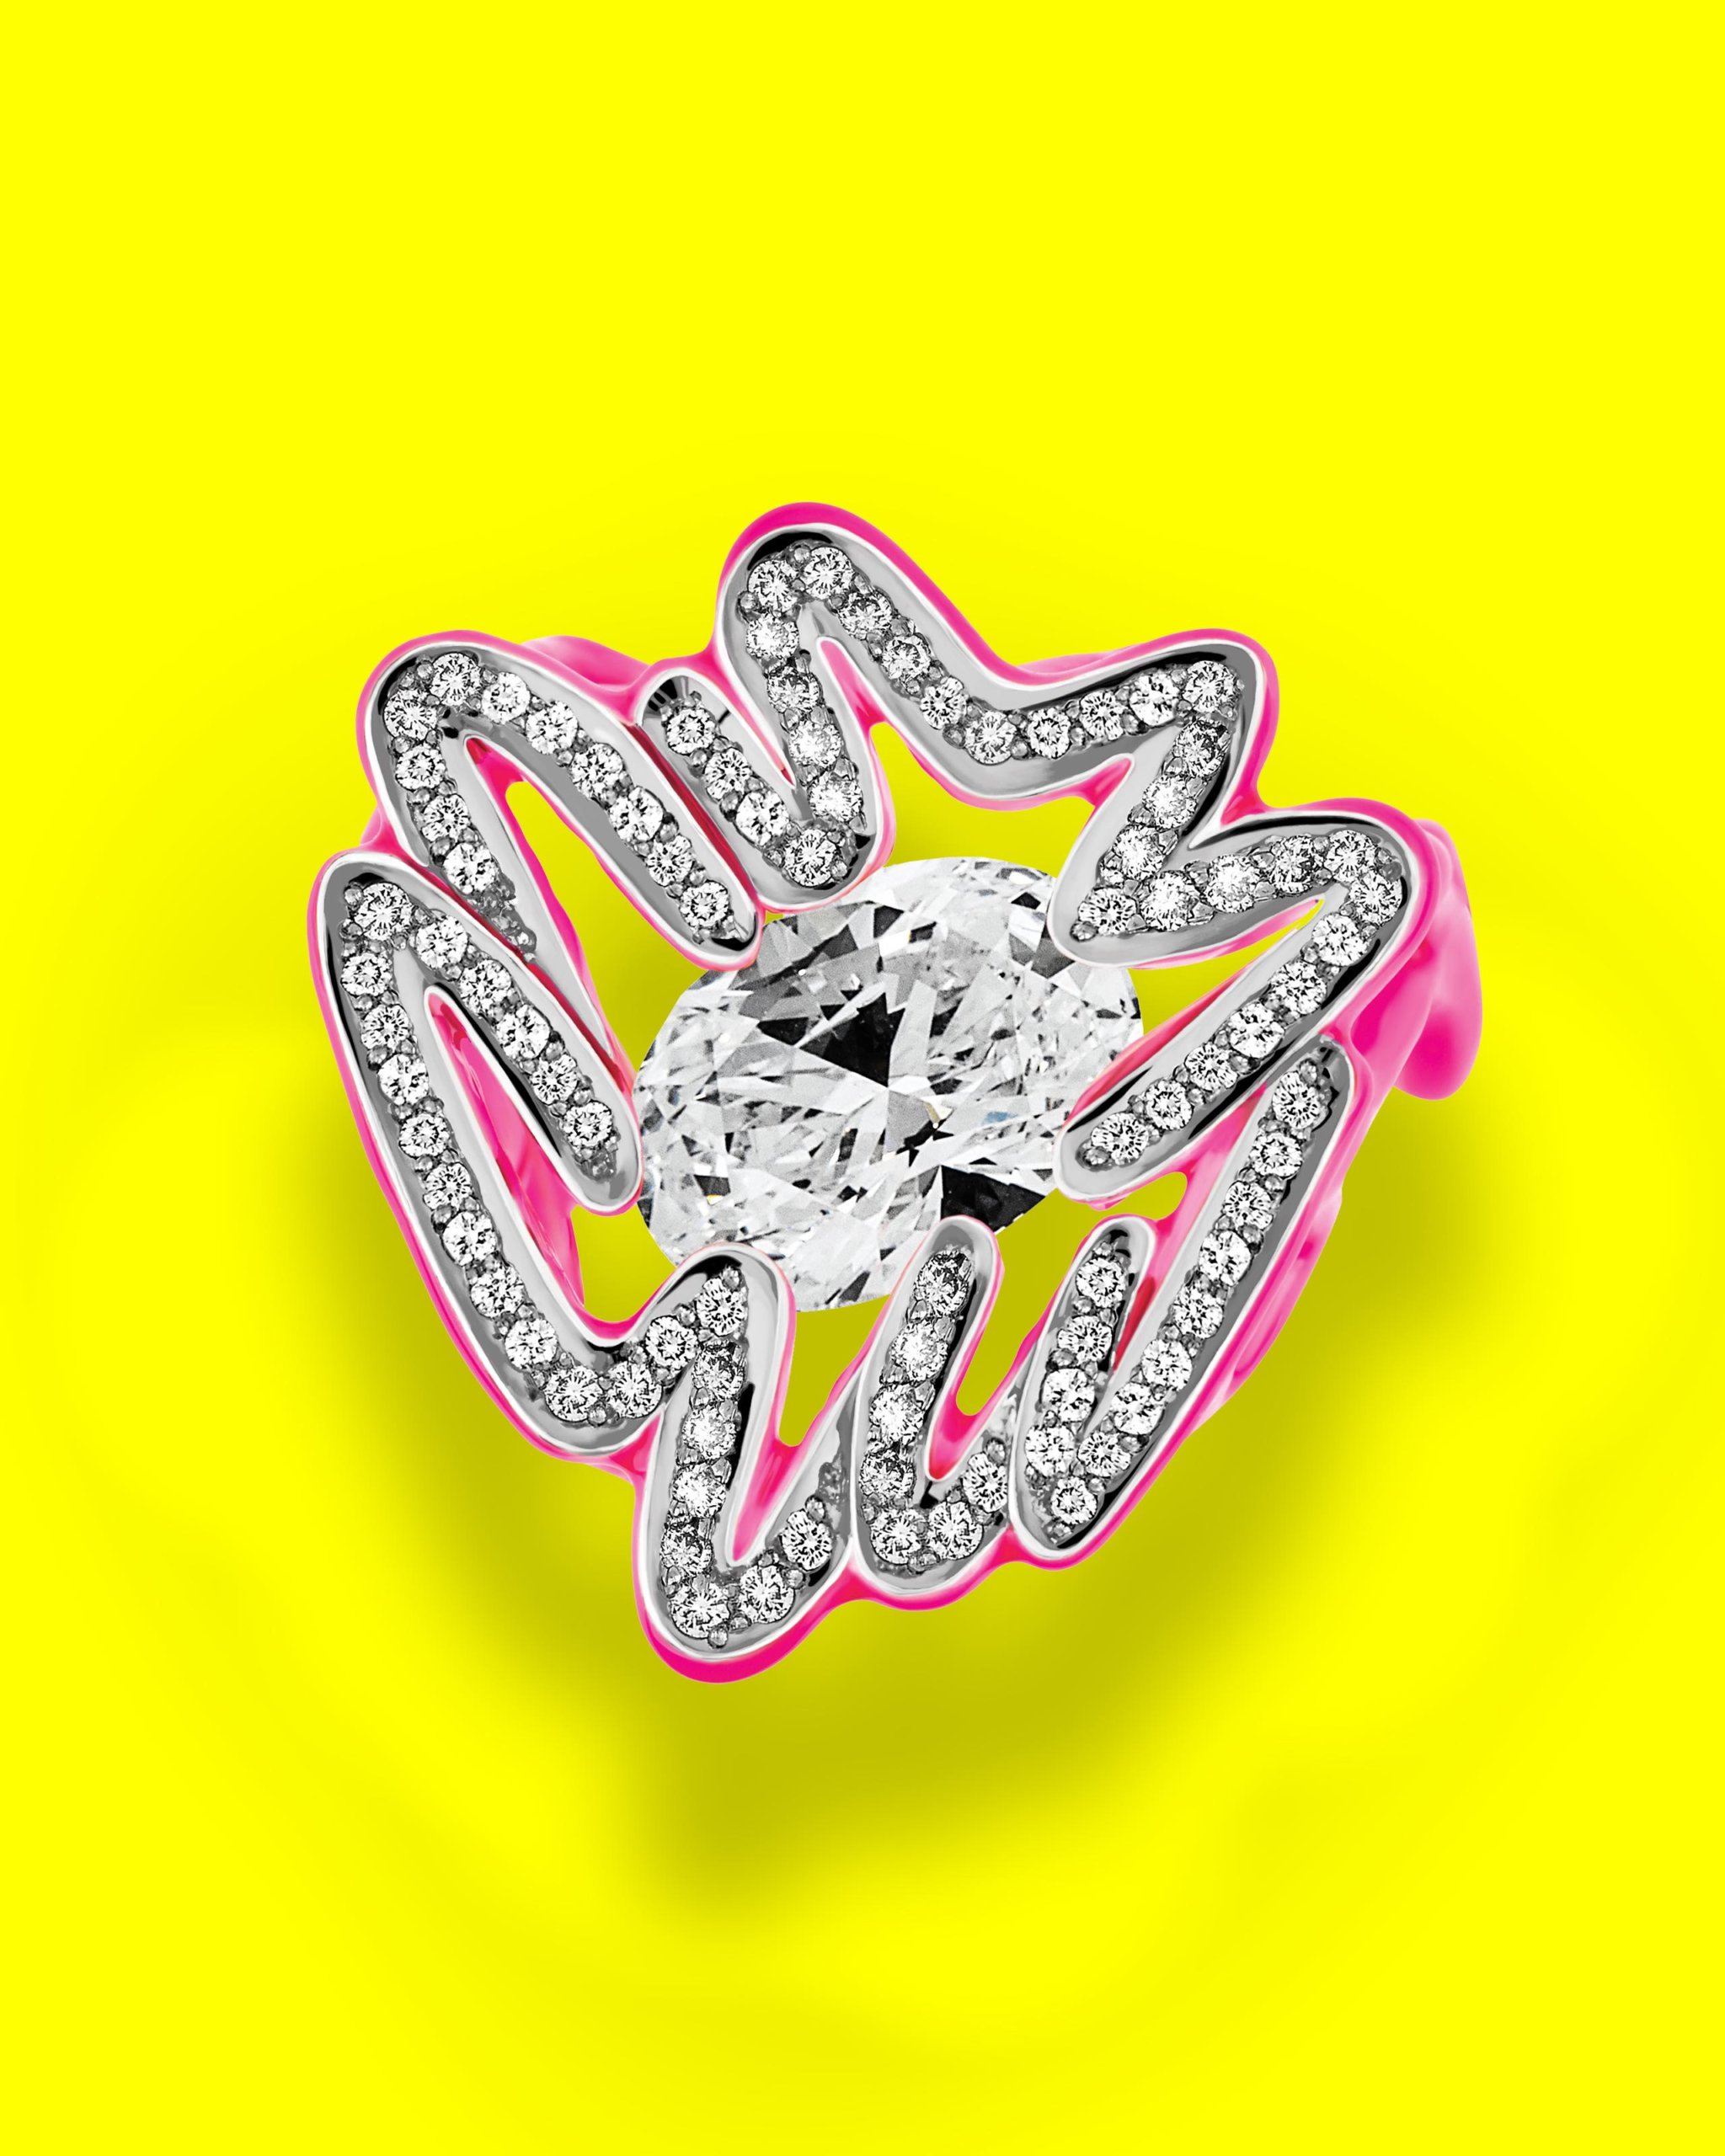 Scribble design neon pink ring with diamond outline and a oval cut diamond in the center by Solange Azagury-Partridge